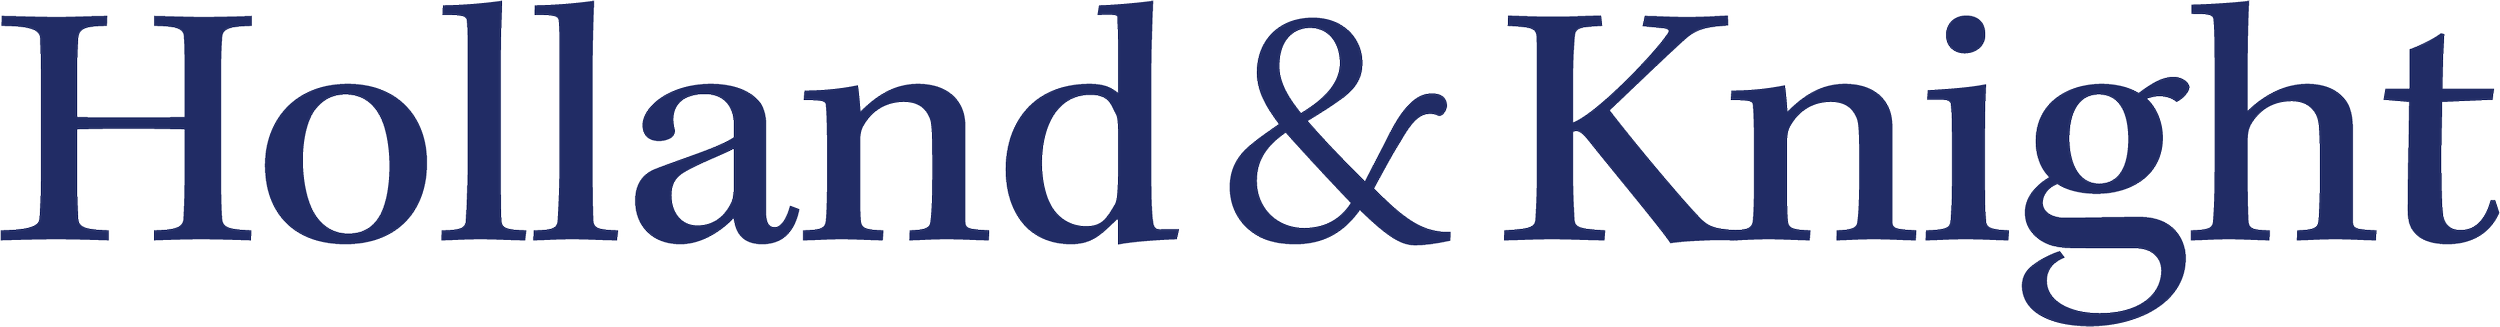 Holland and Knight LLP Logo.png